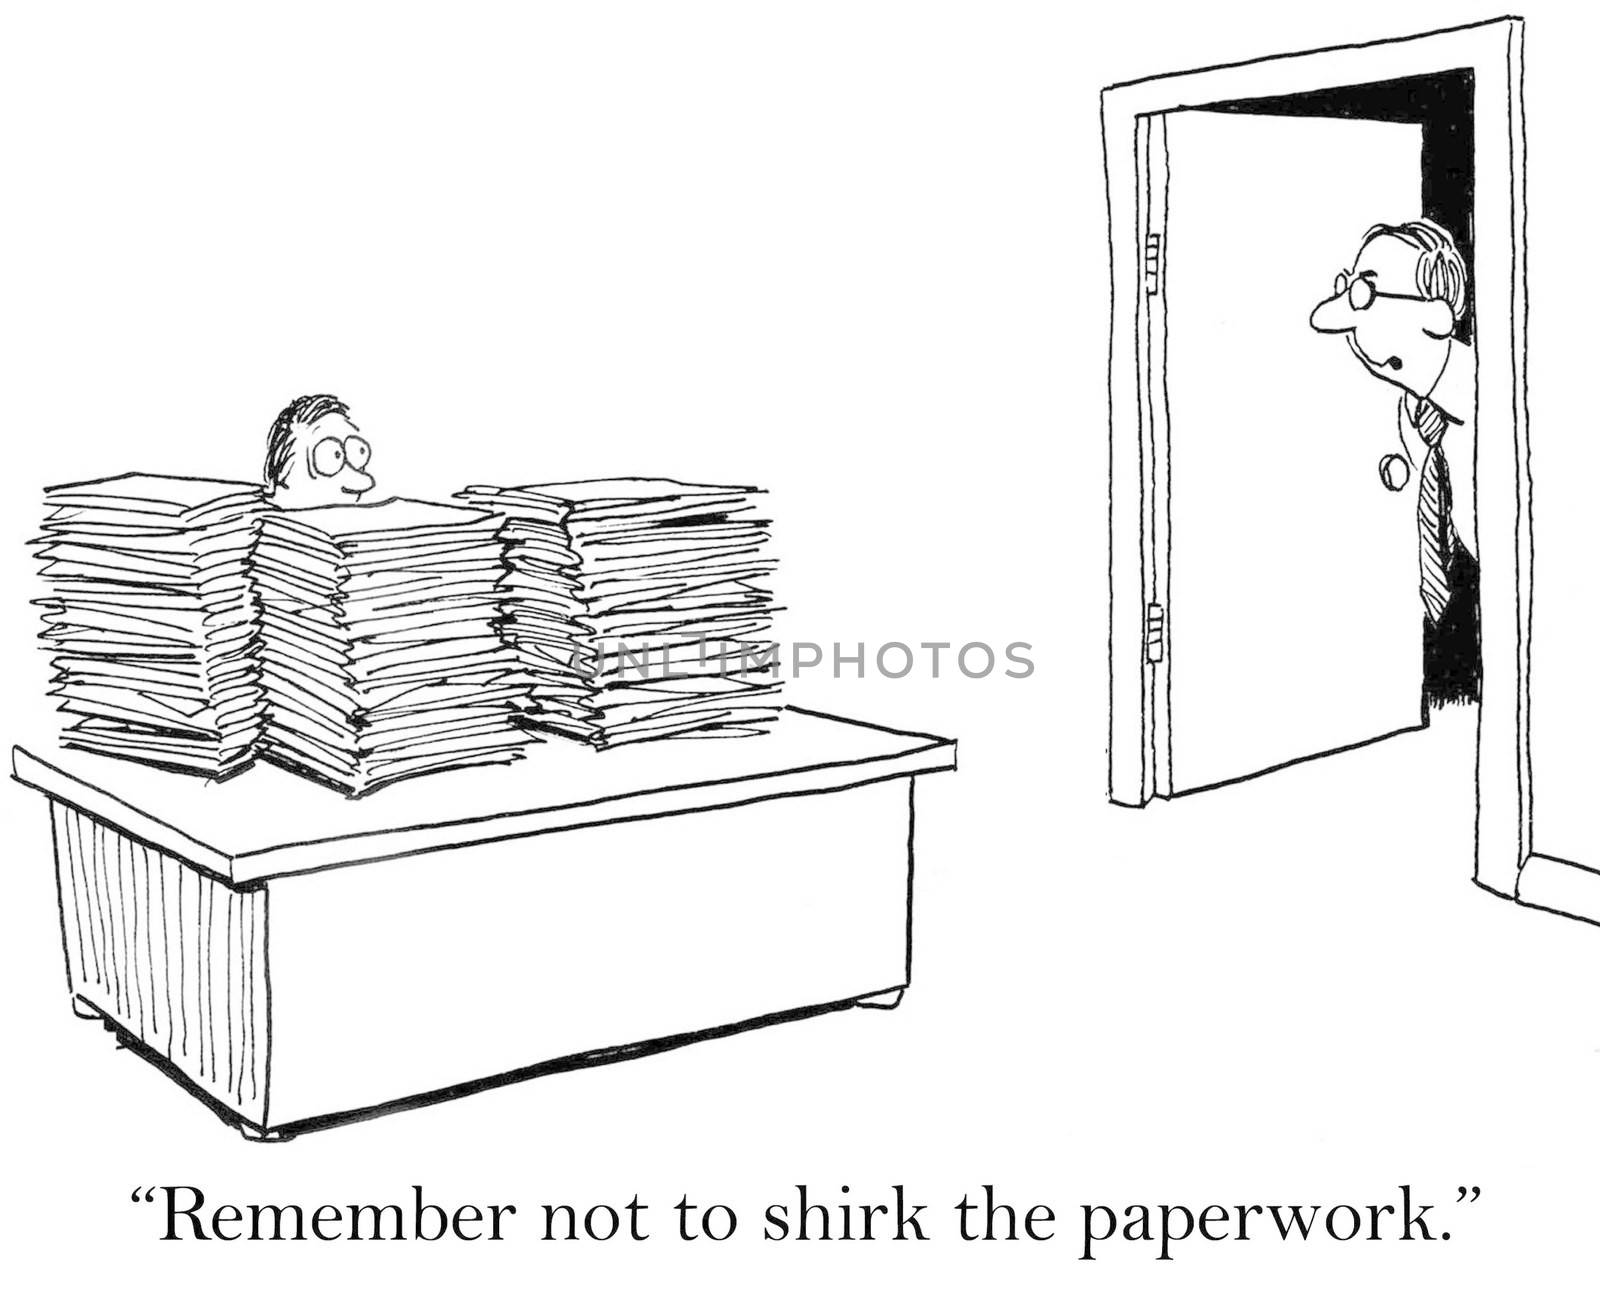 "Remember not to shirk the paper work."